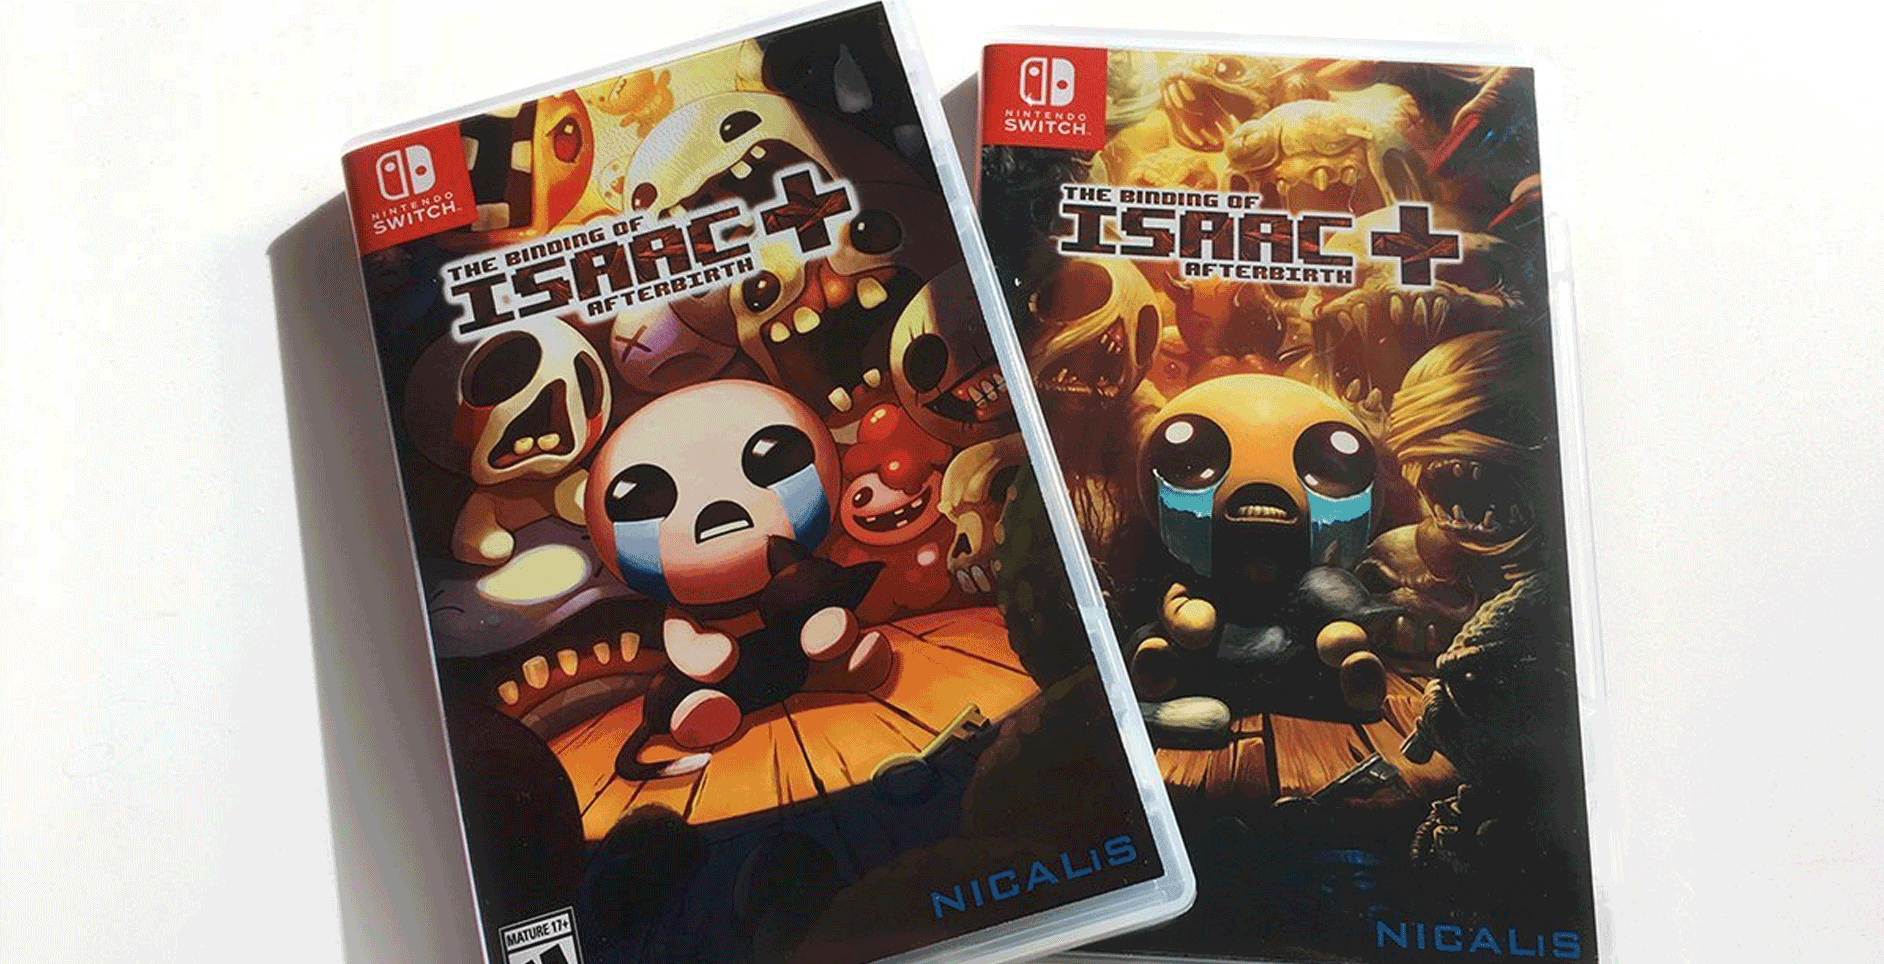 console command binding of isaac switch